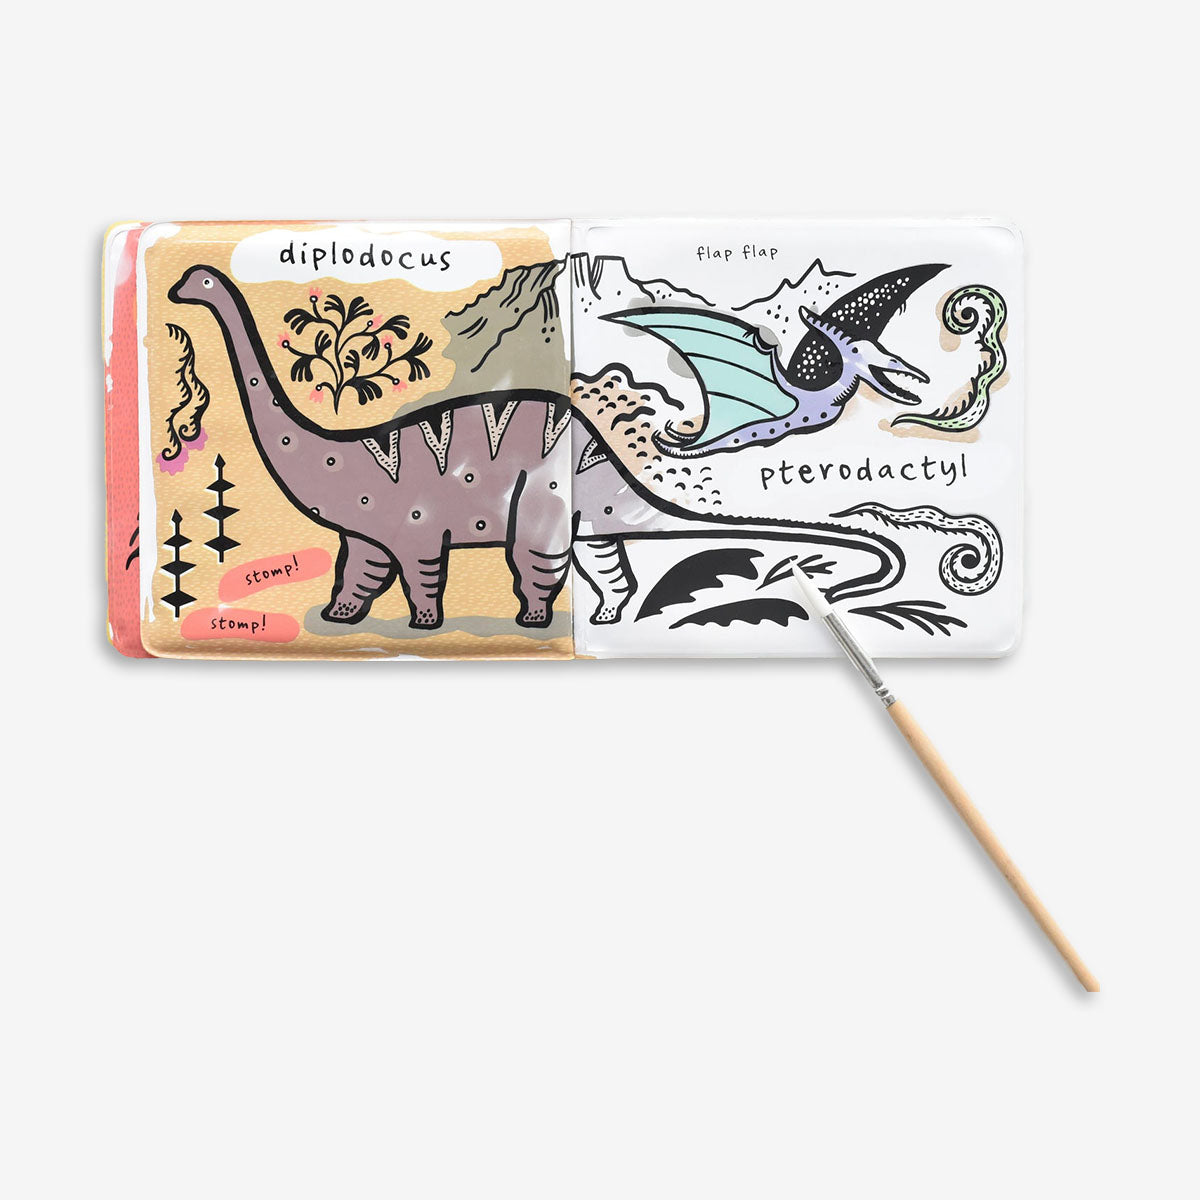 Wee Gallery Bath Book - Who Loves Dinosaurs